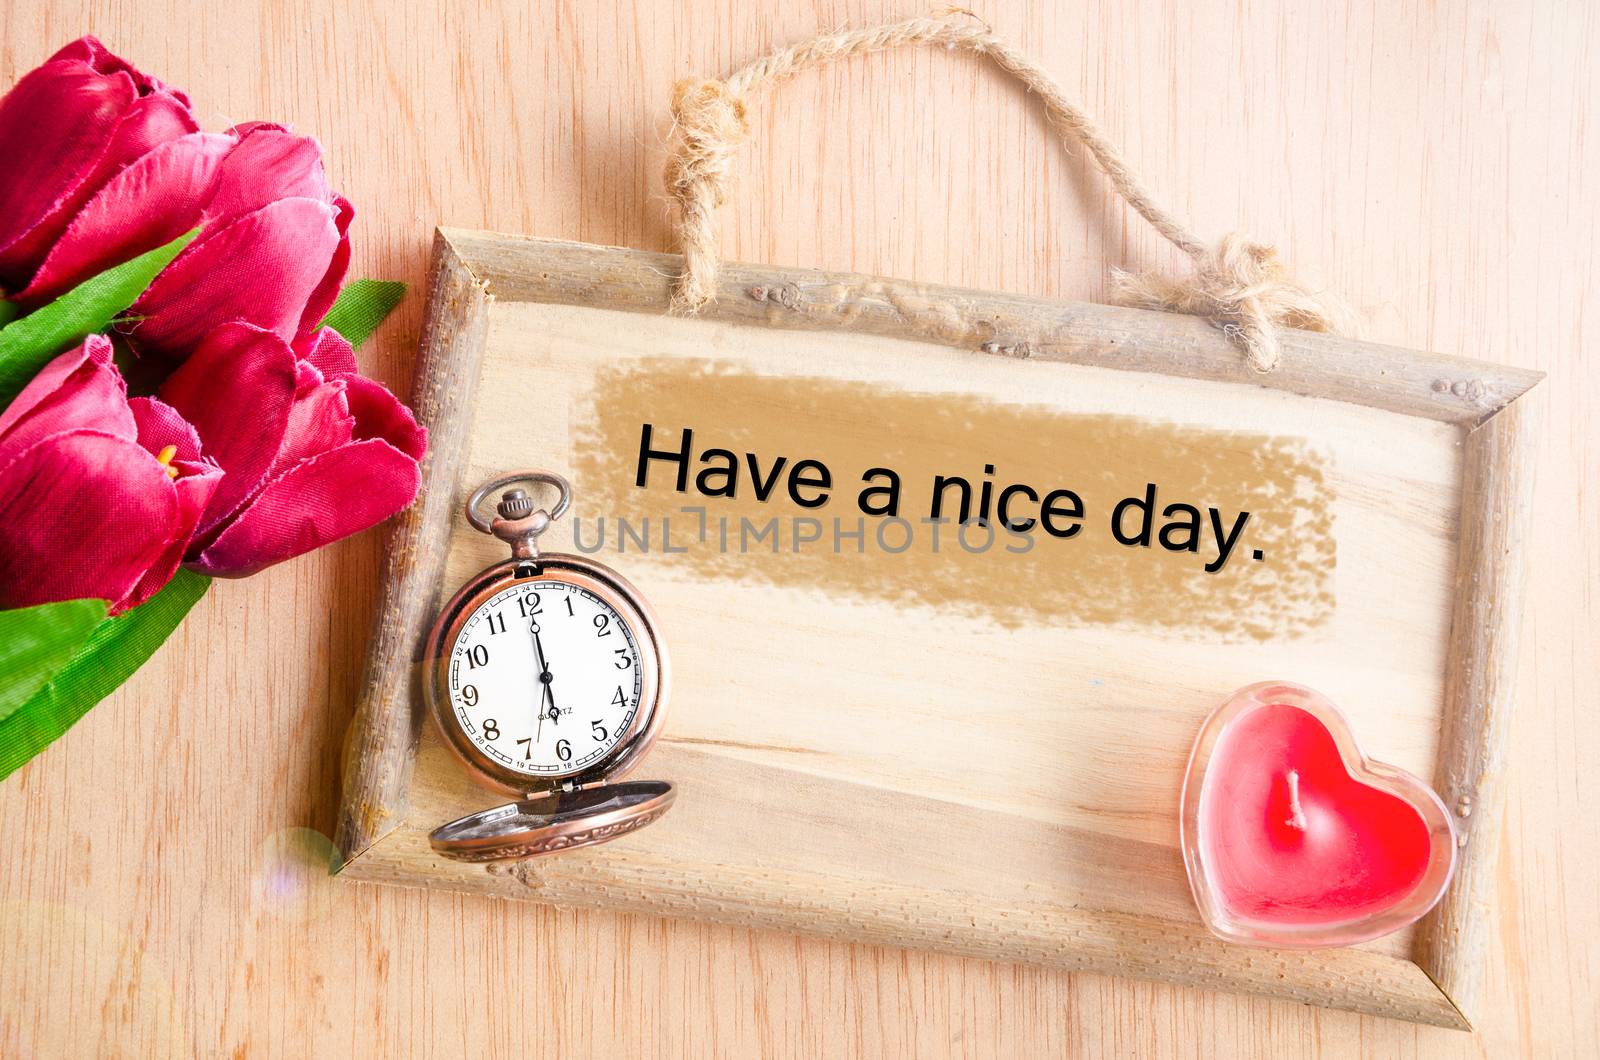 Have a nice day. Clock and red tulip with red candle heart shape on wooden background.